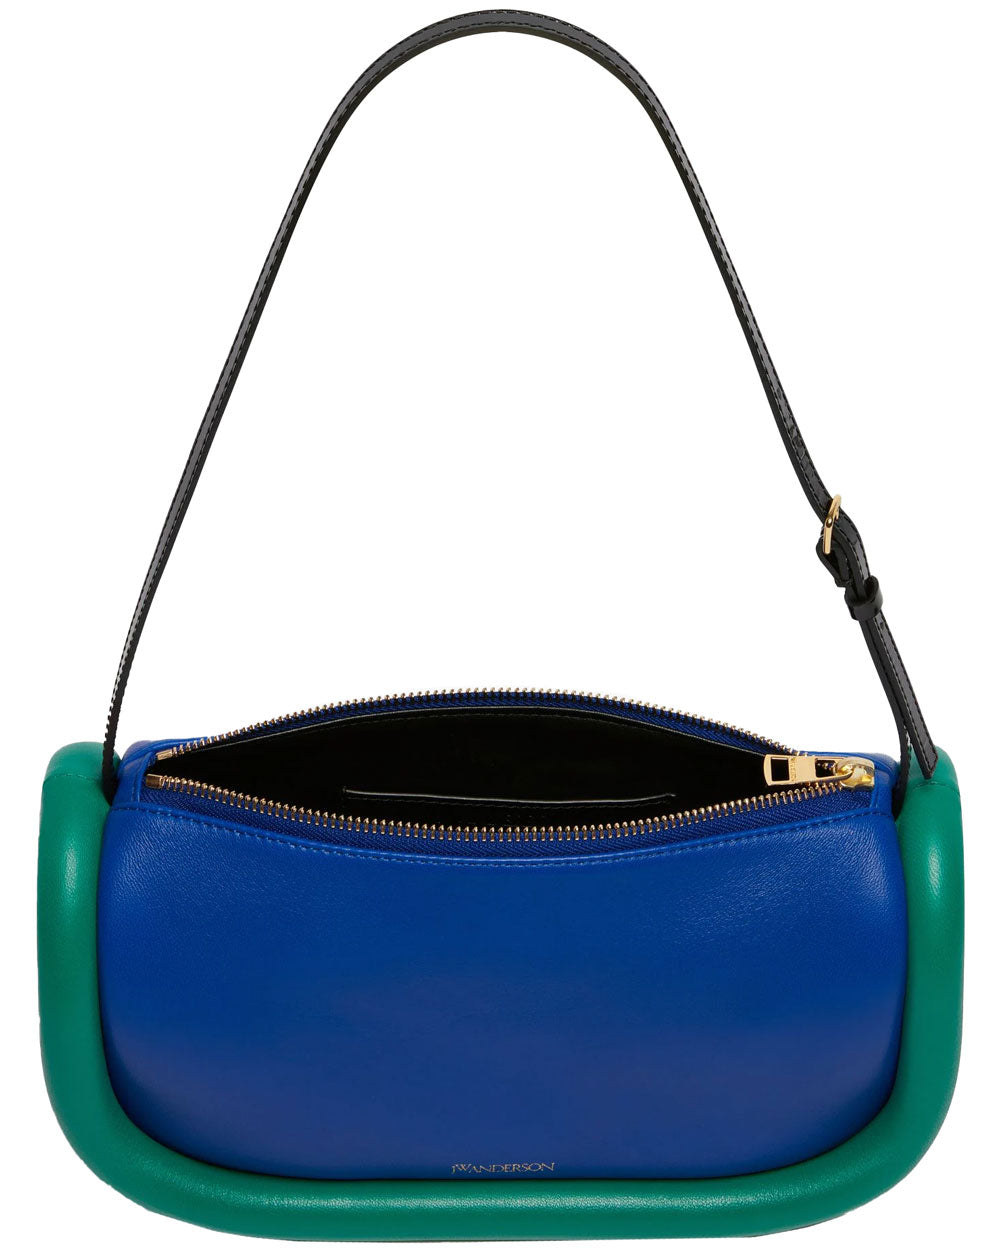 The Bumper Baguette in Cobalt and Green